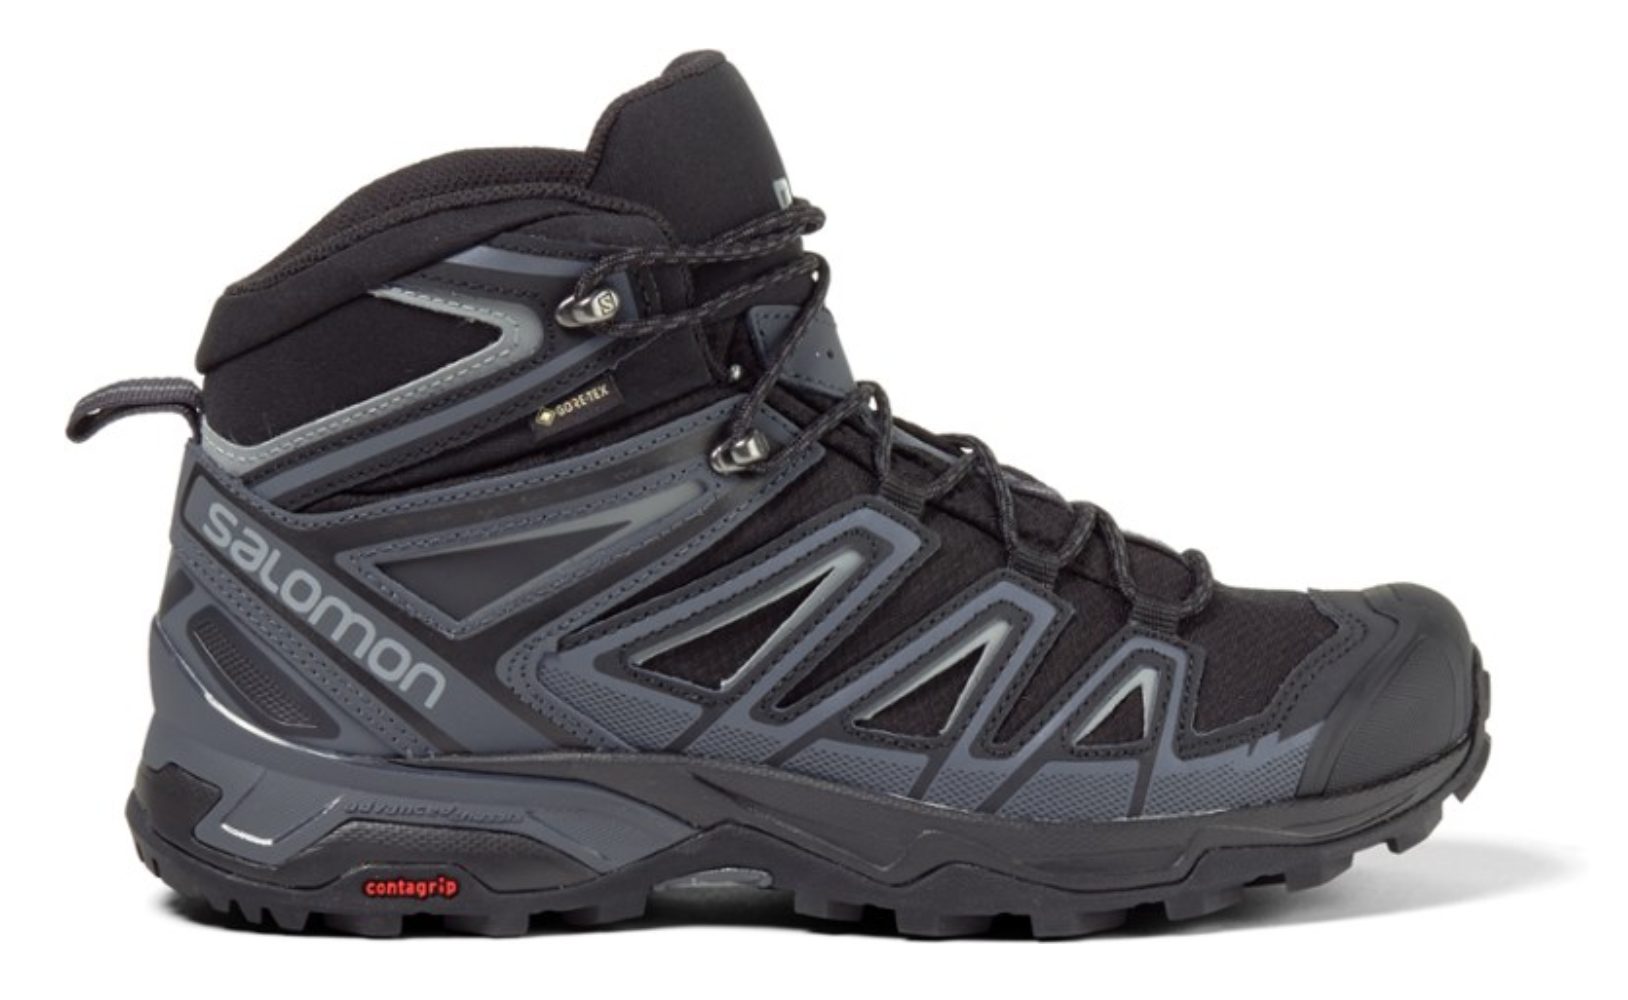 Best Hiking Boots for Backpacking Trips - Wildland Trekking